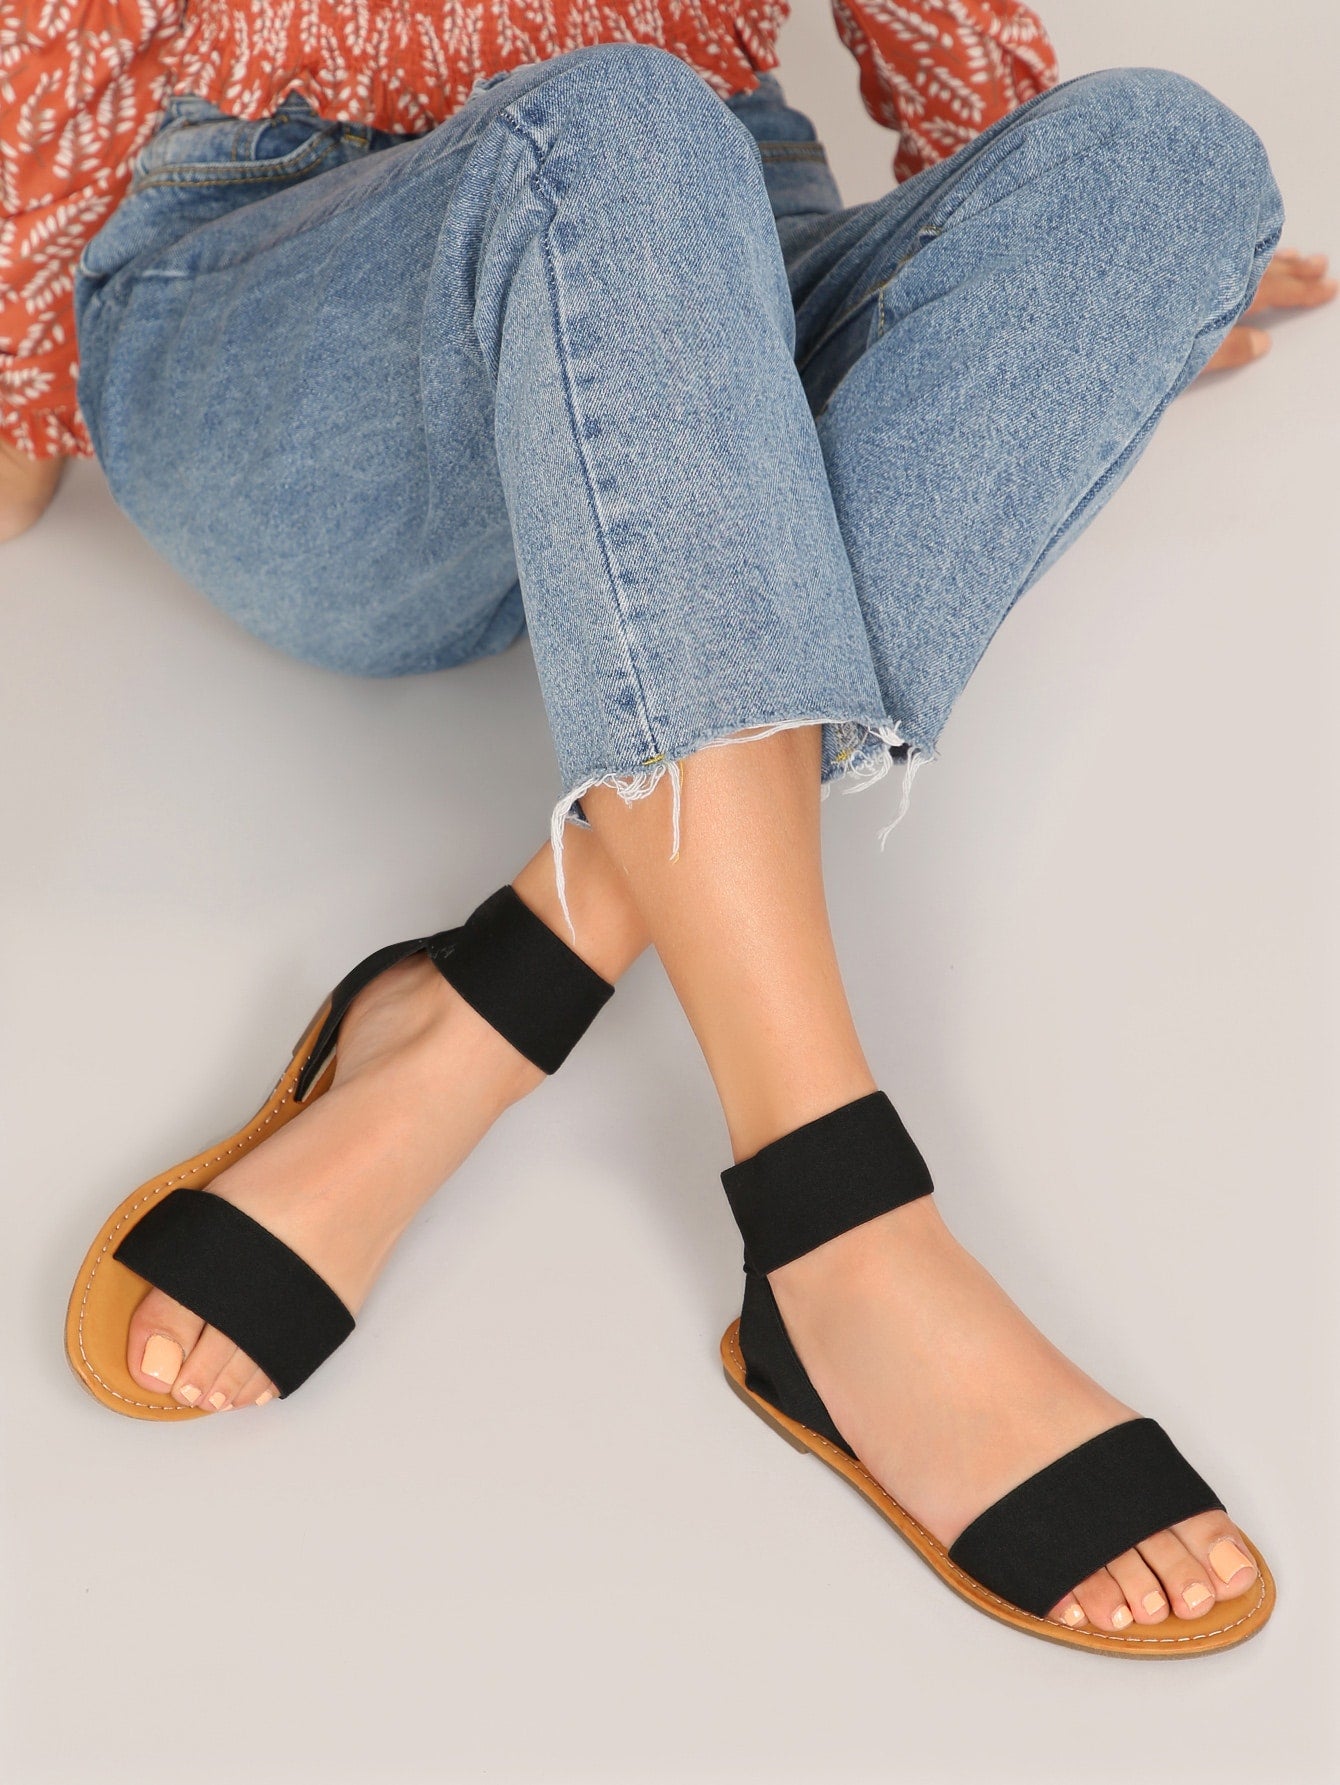 Stretchy Open Toe Ankle Strap Gladiator Sandals